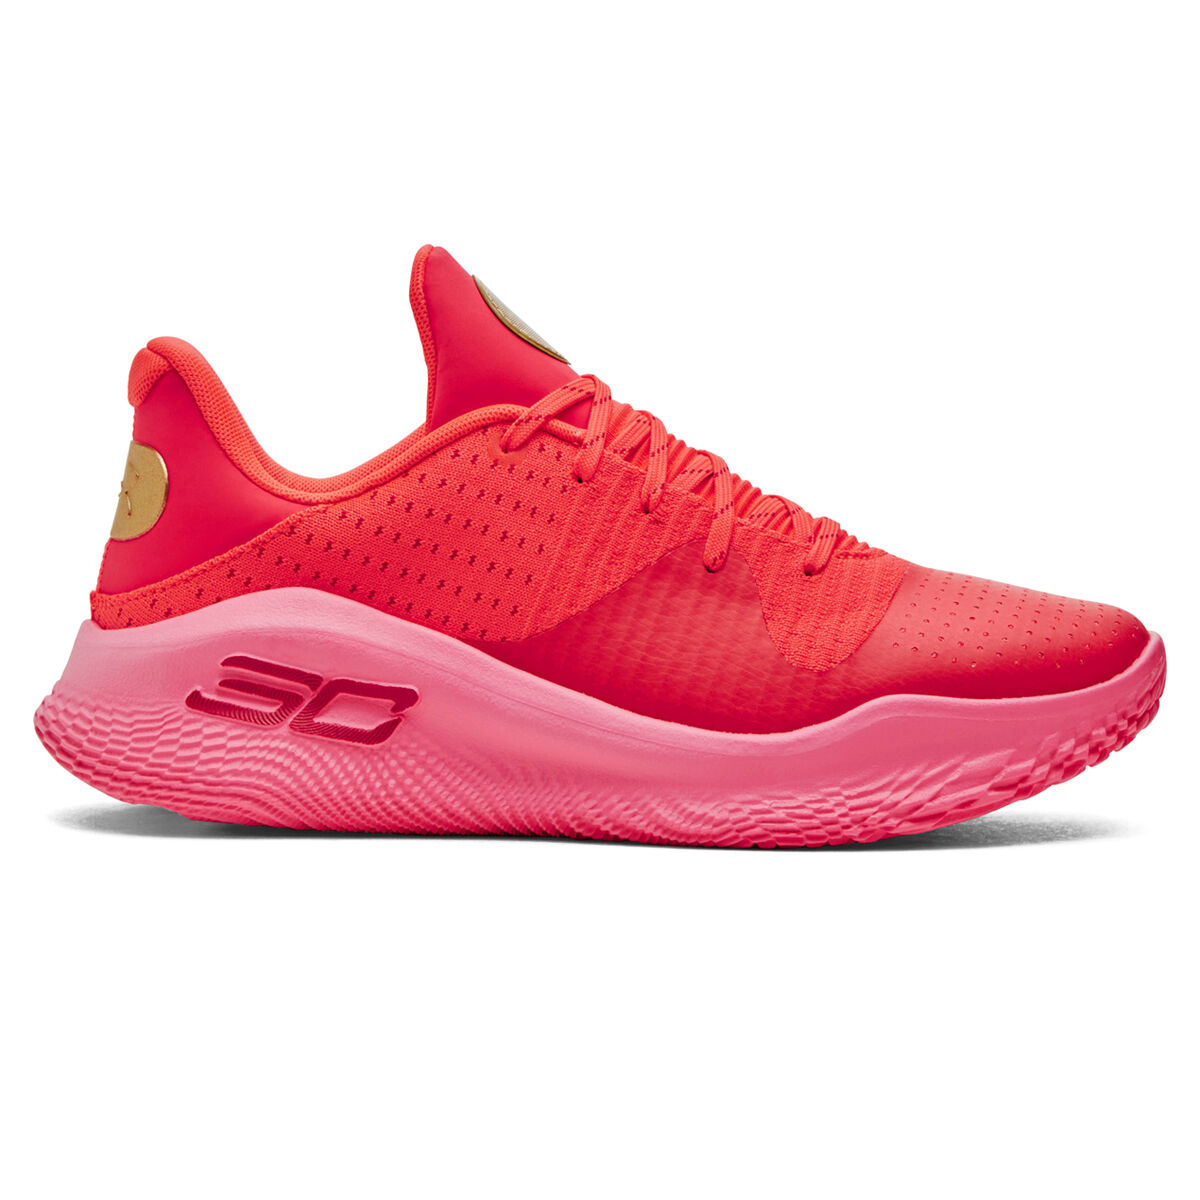 Under Armour Curry 4 Low Flotro Flooded Basketball Shoes Red US Mens 8 ...